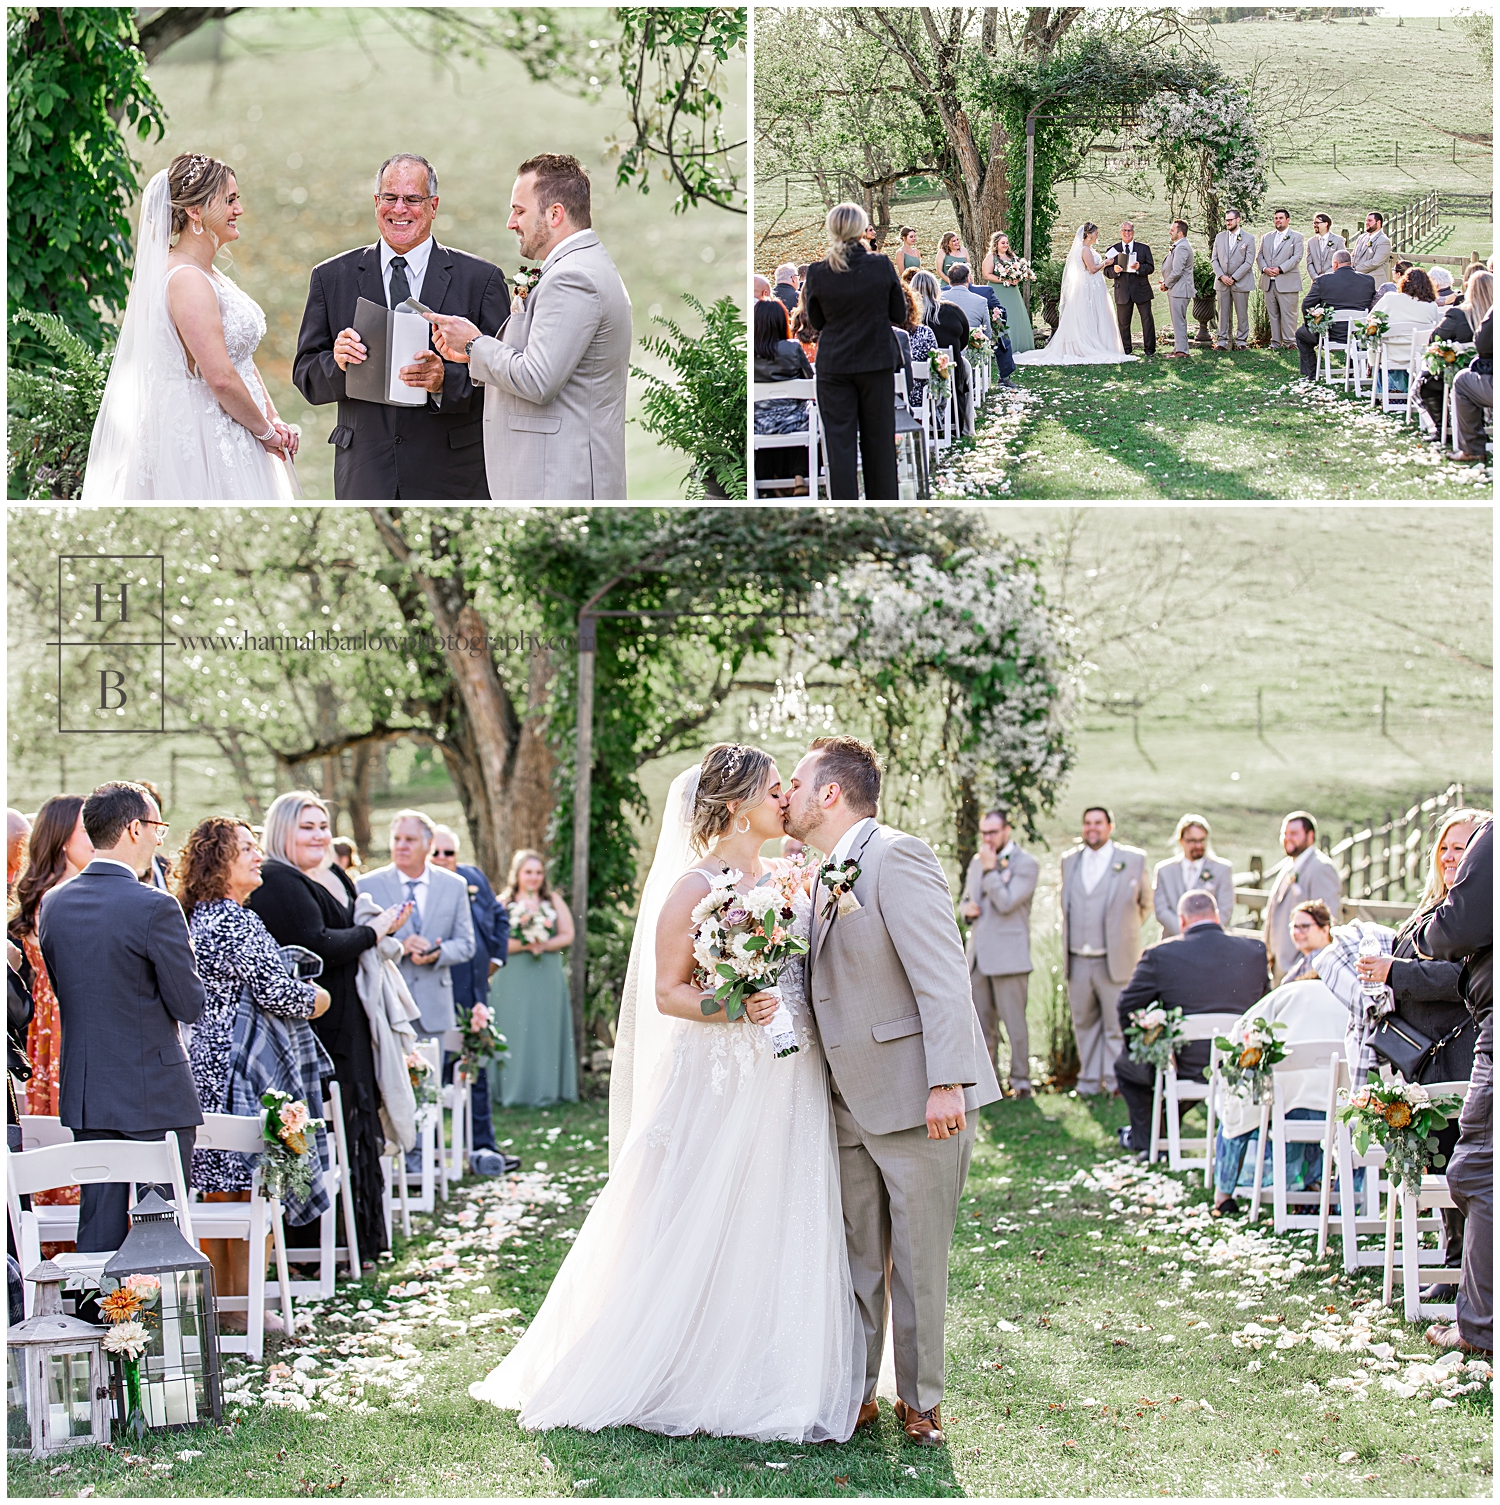 Collage of bride and groom getting married under grass covered arbor.